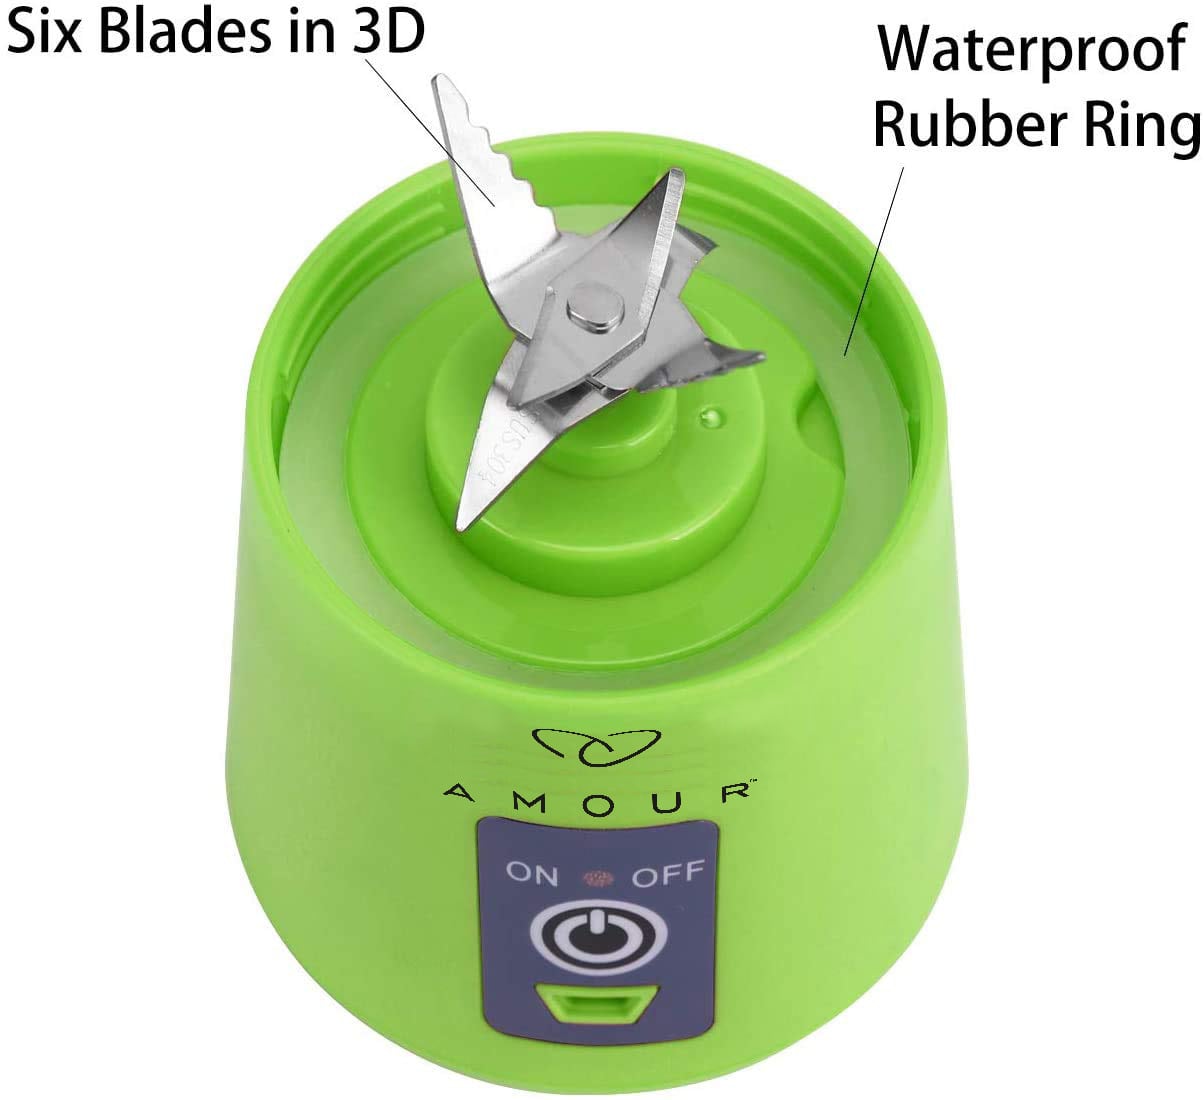 Buy Amour Portable Blender, Smoothie Juicer Cup-Six Blades in 3D